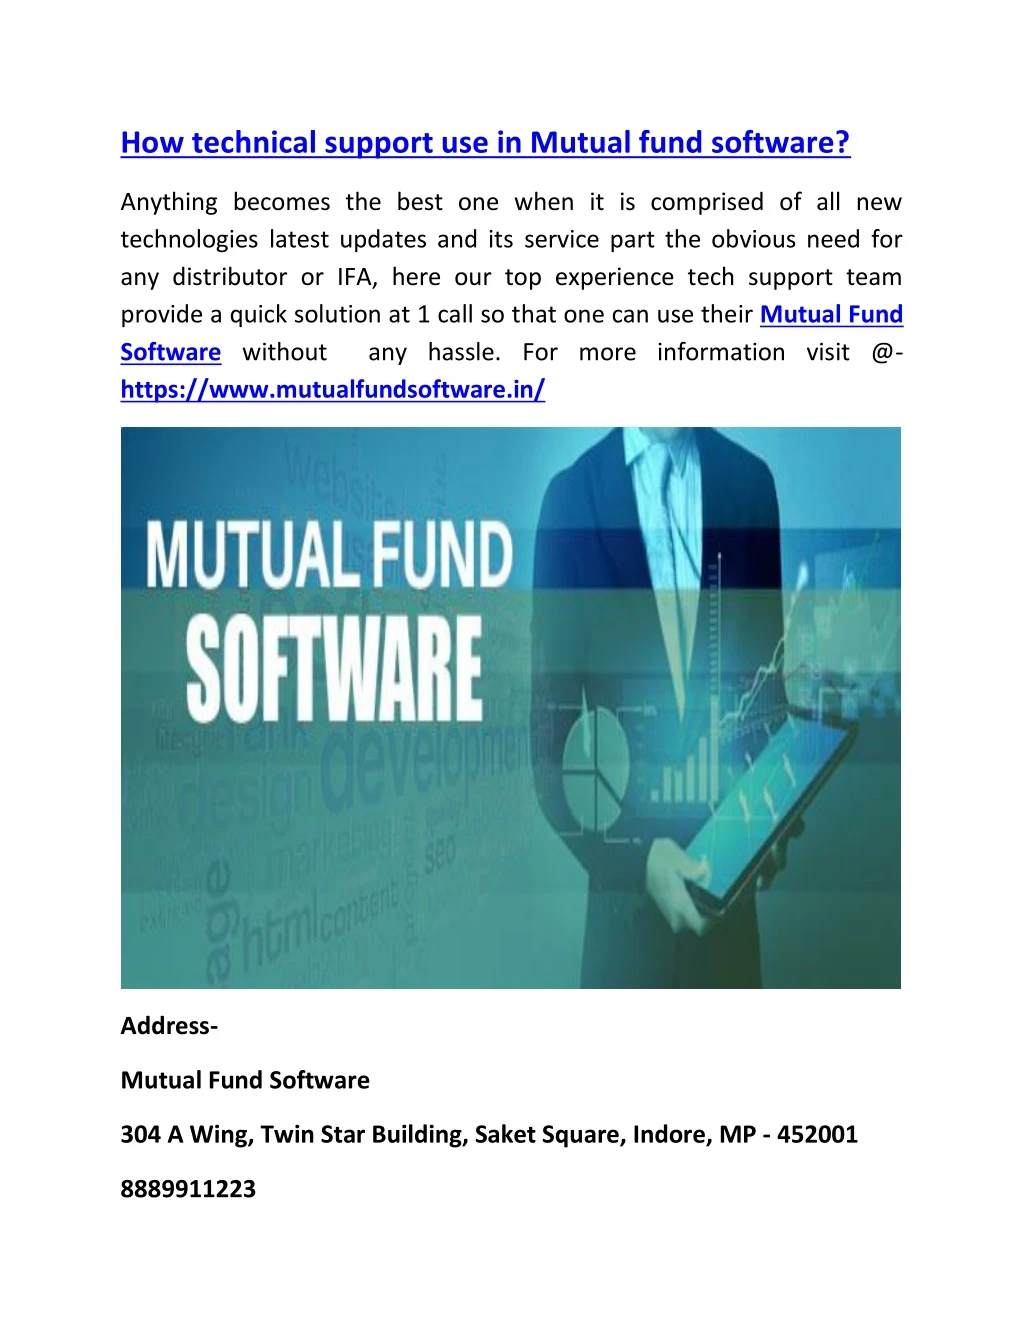 how technical support use in mutual fund software